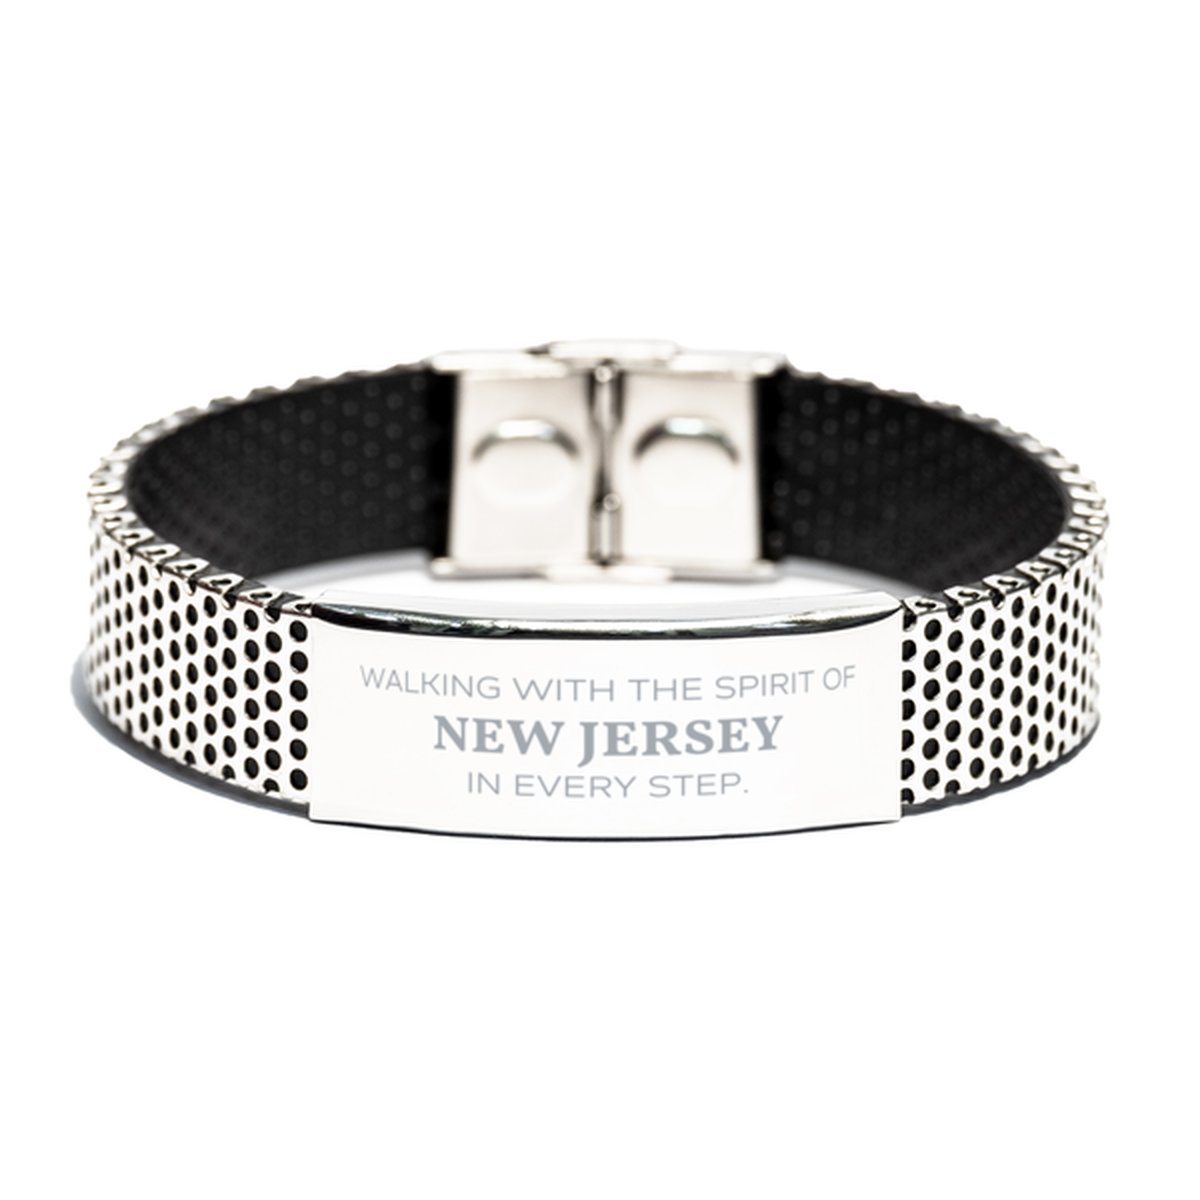 New Jersey Gifts, Walking with the spirit, Love New Jersey Birthday Christmas Stainless Steel Bracelet For New Jersey People, Men, Women, Friends